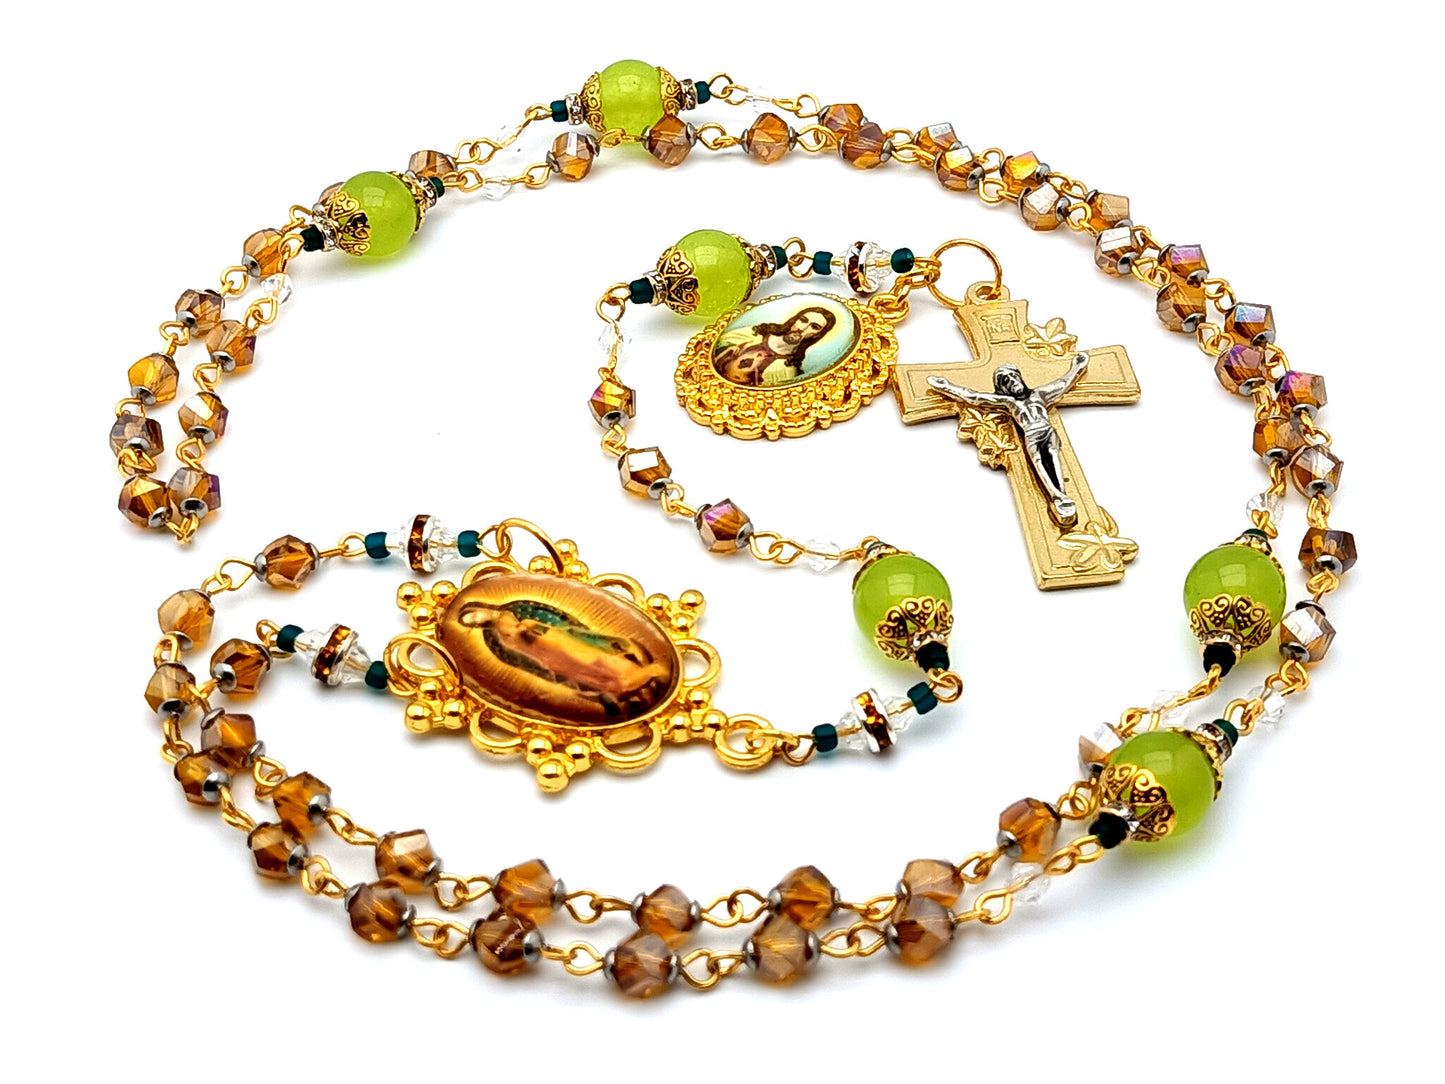 Our Lady of Guadalupe unique rosary beads with glass and gemstone beads and Sacred Heart gold medal and lily crucifix.